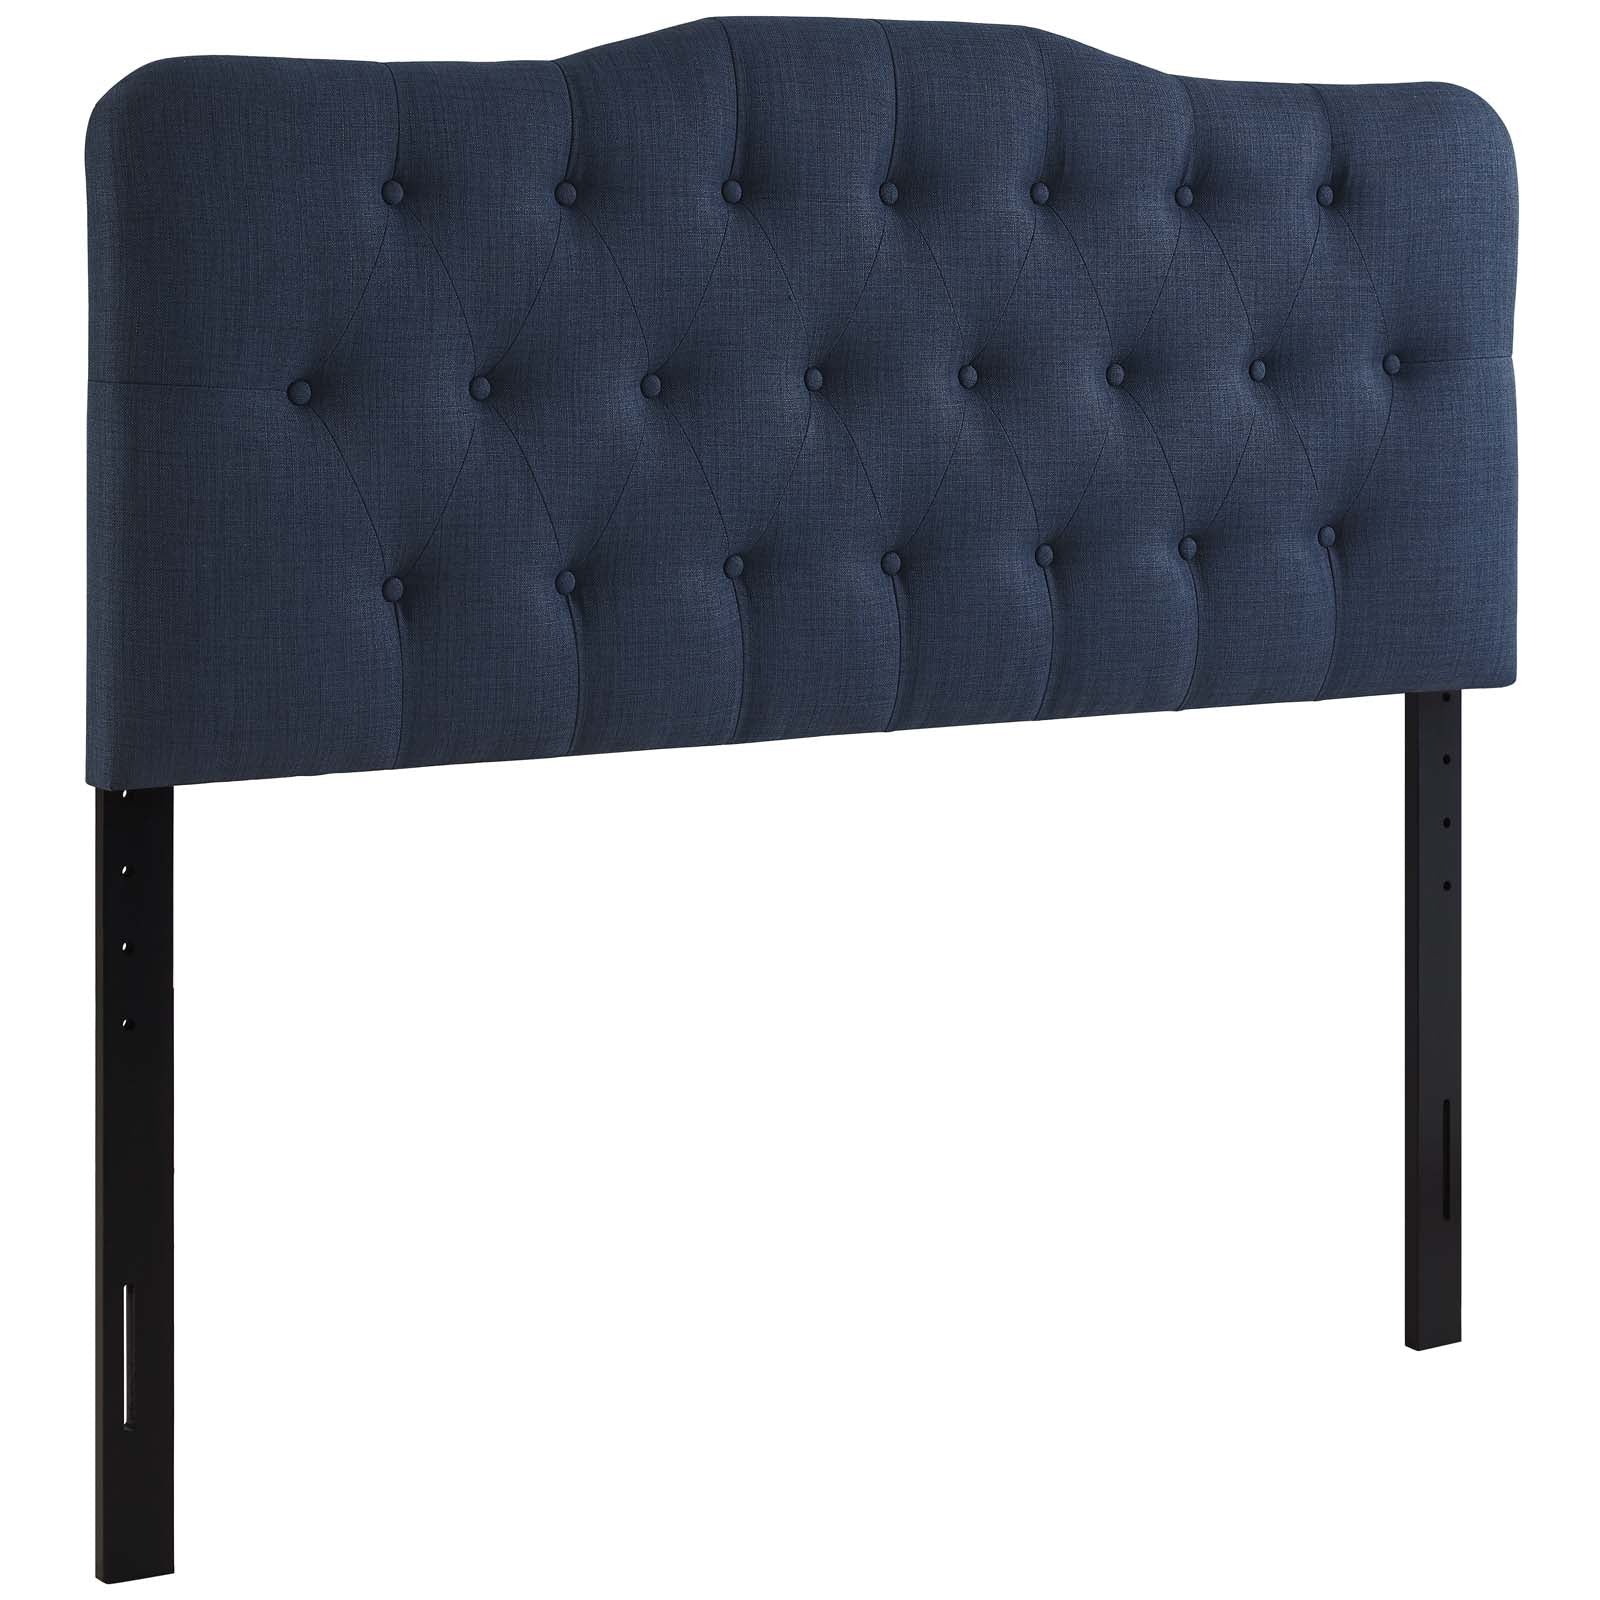 Annabel Queen Upholstered Fabric Headboard - East Shore Modern Home Furnishings